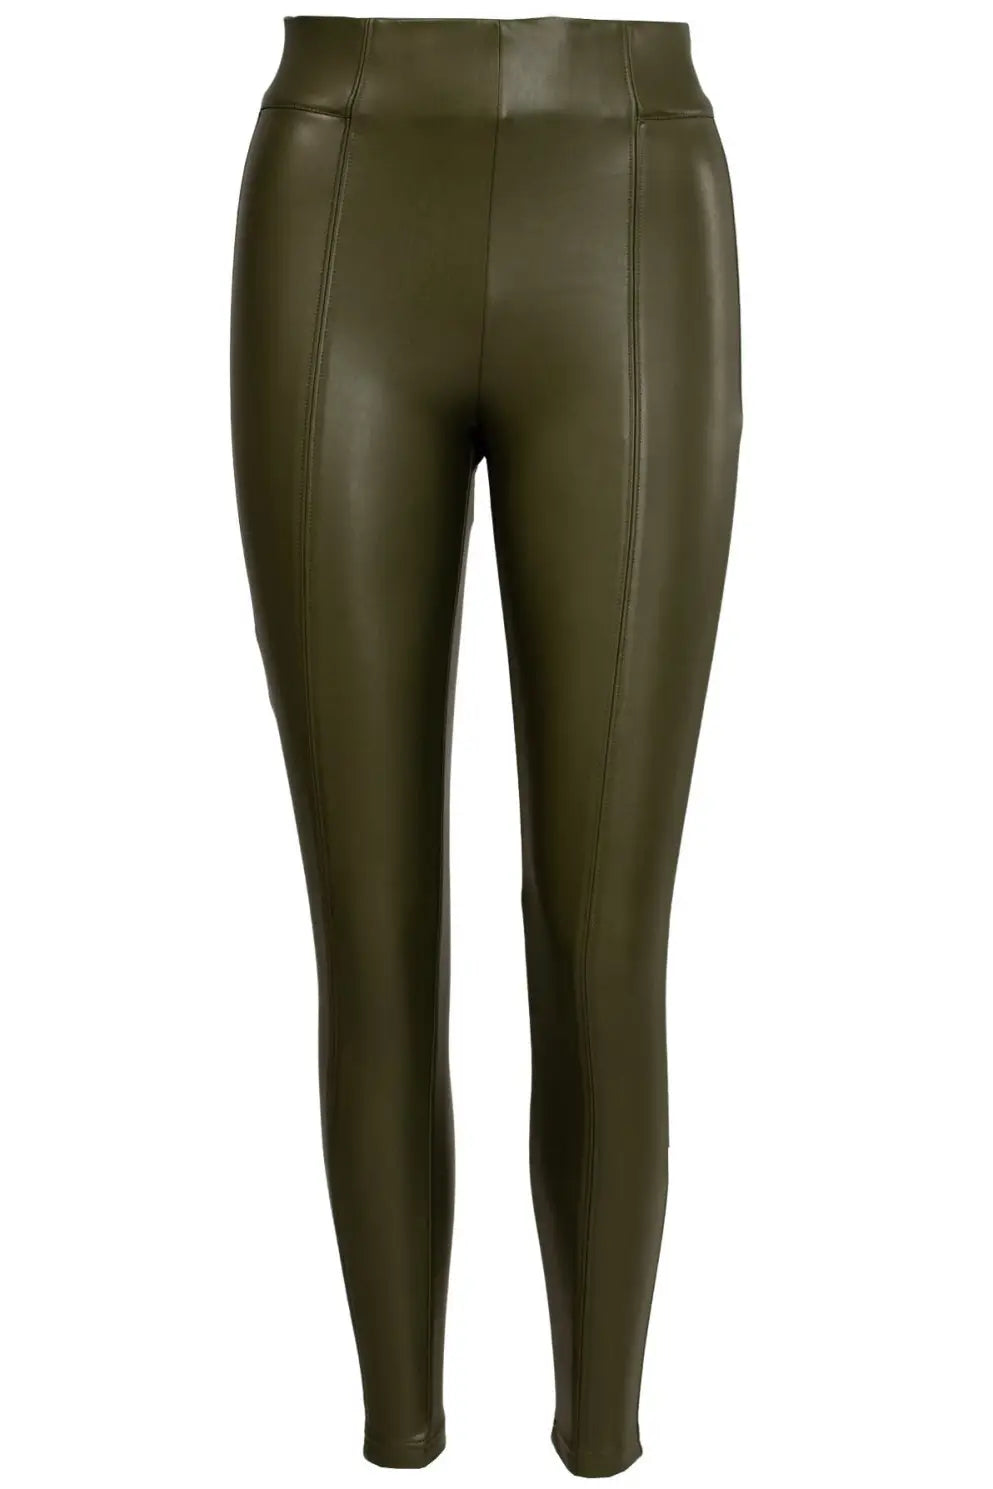 M&S Leather Look Leggings Trousers